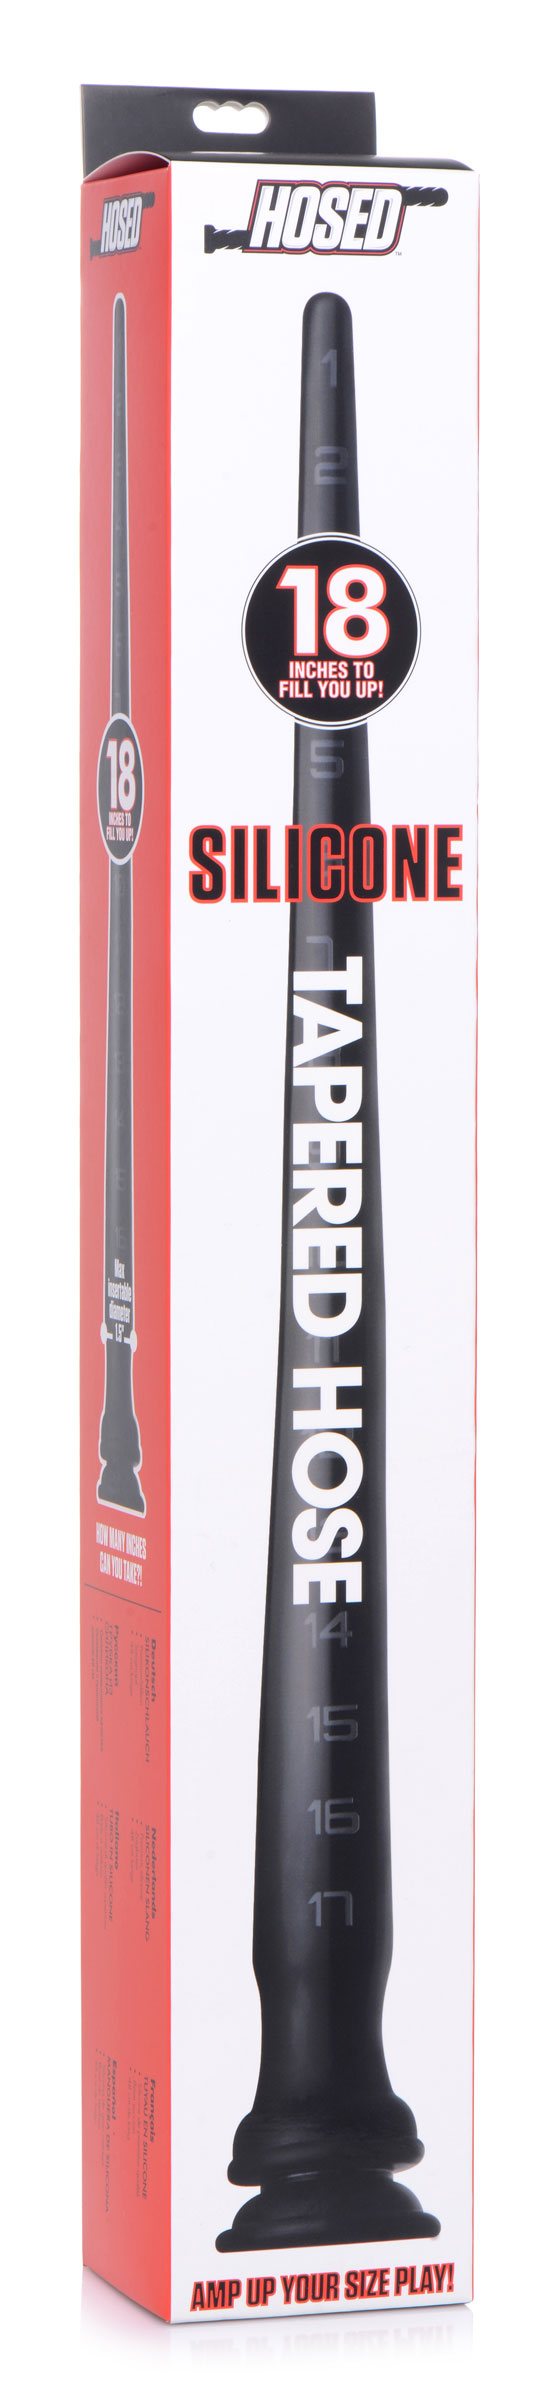 Silicone Tapered Anal Hose - 18 Inch